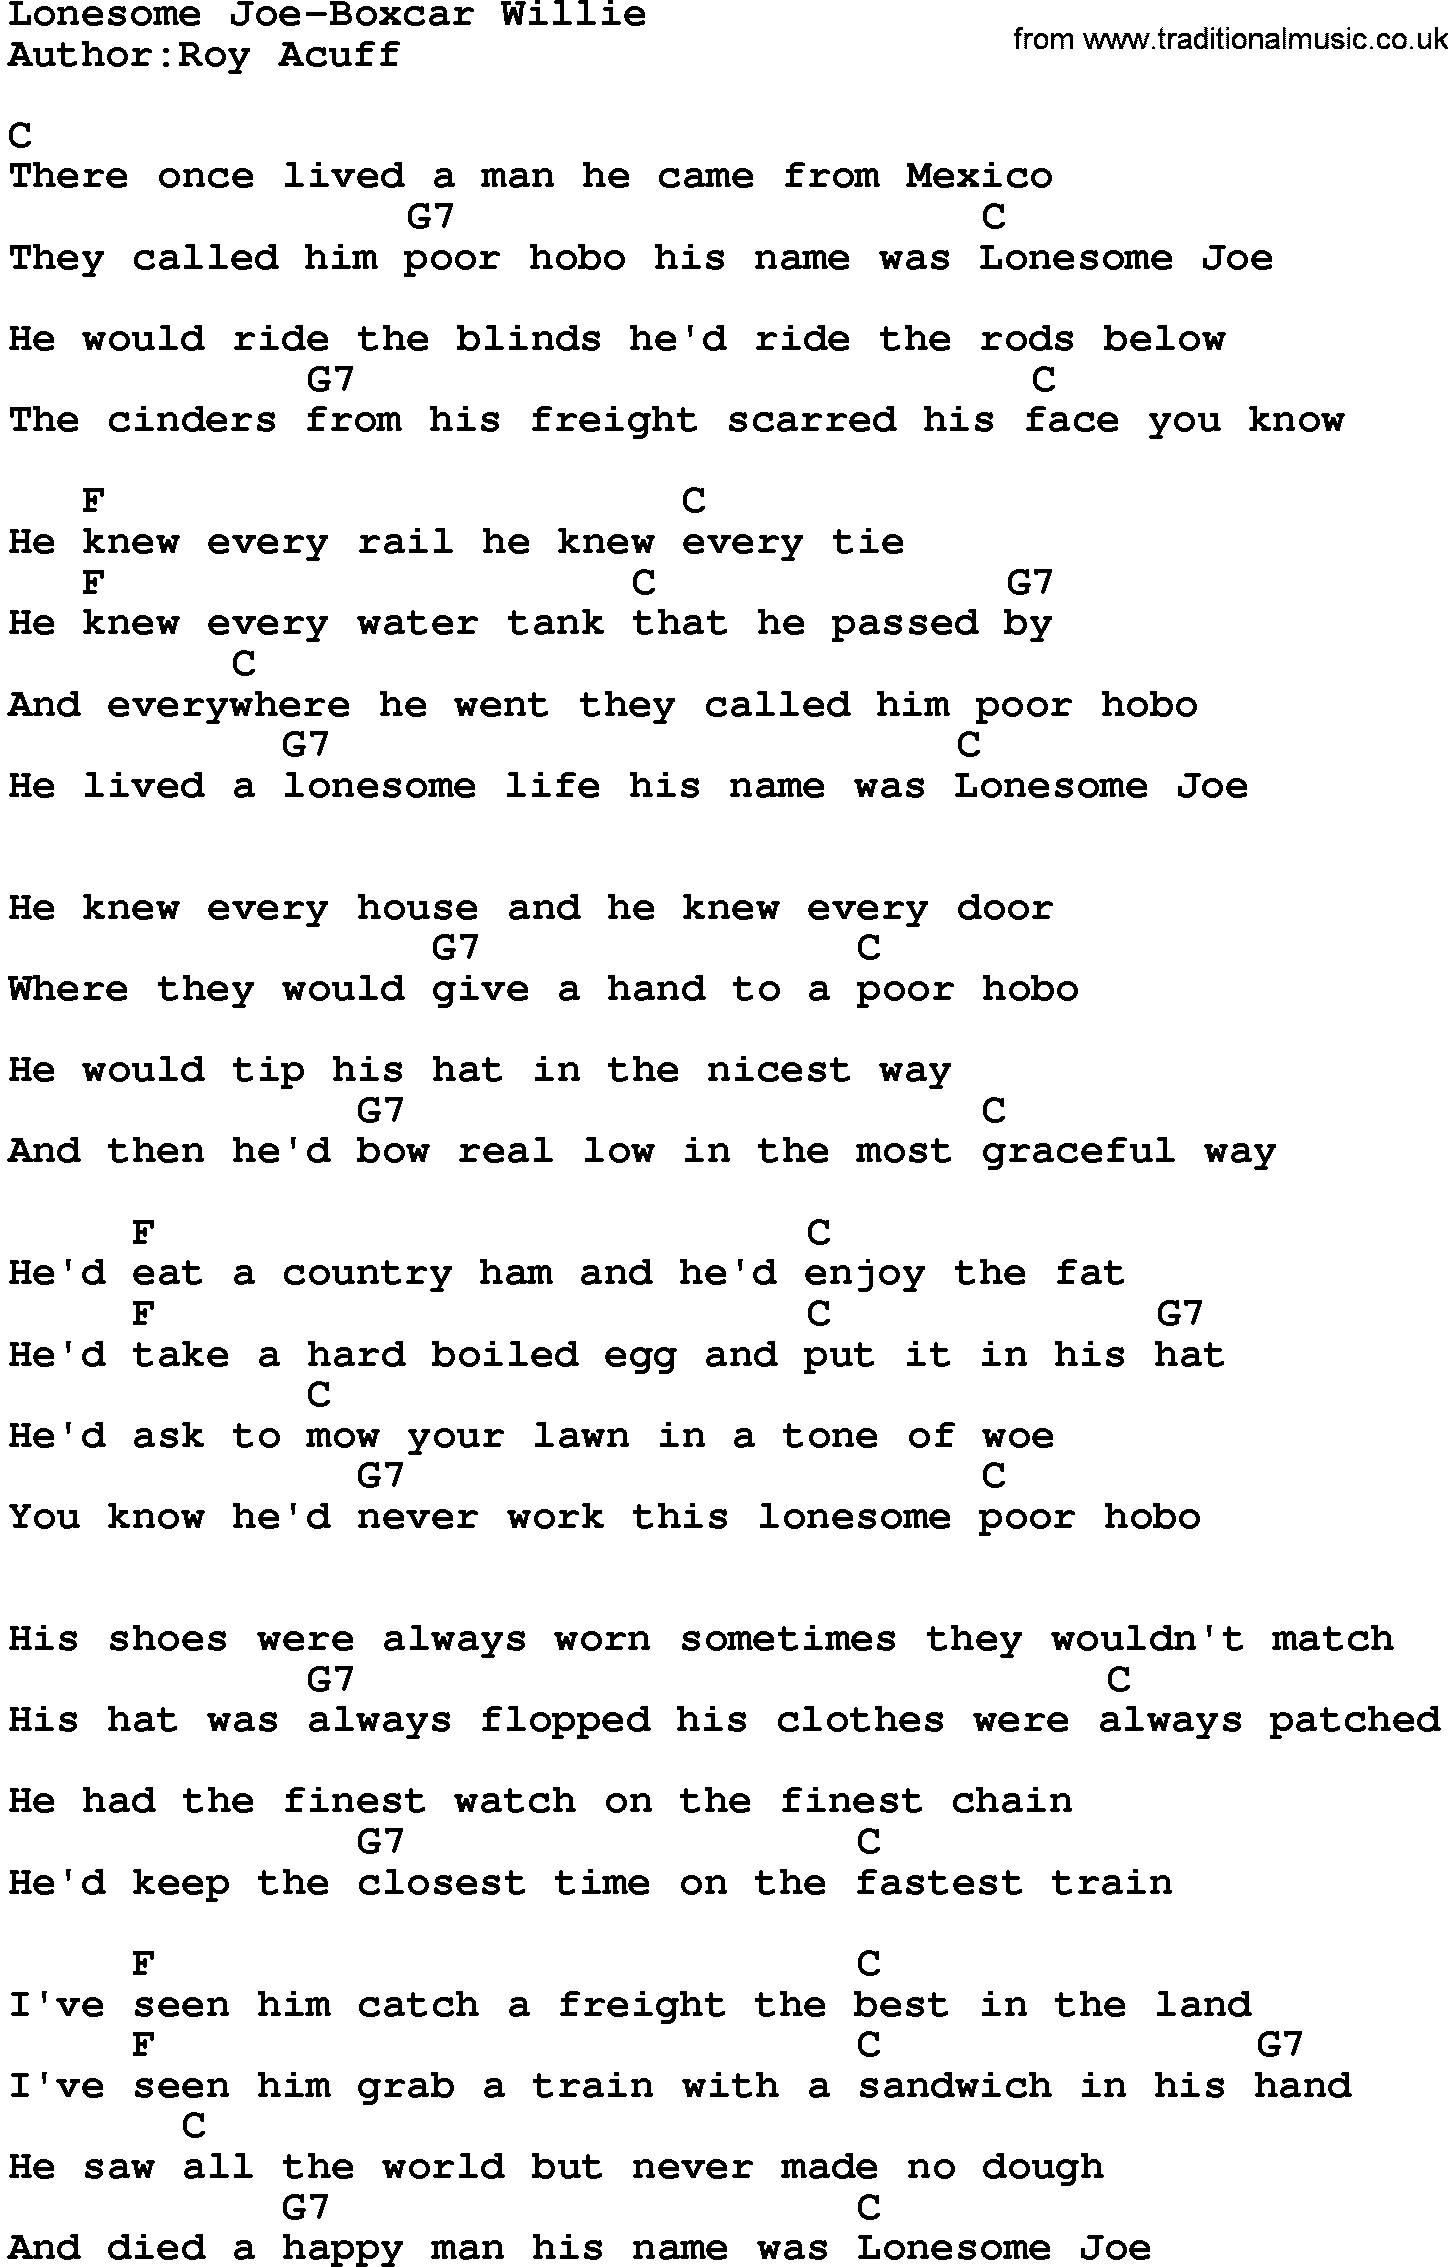 Country music song: Lonesome Joe-Boxcar Willie lyrics and chords